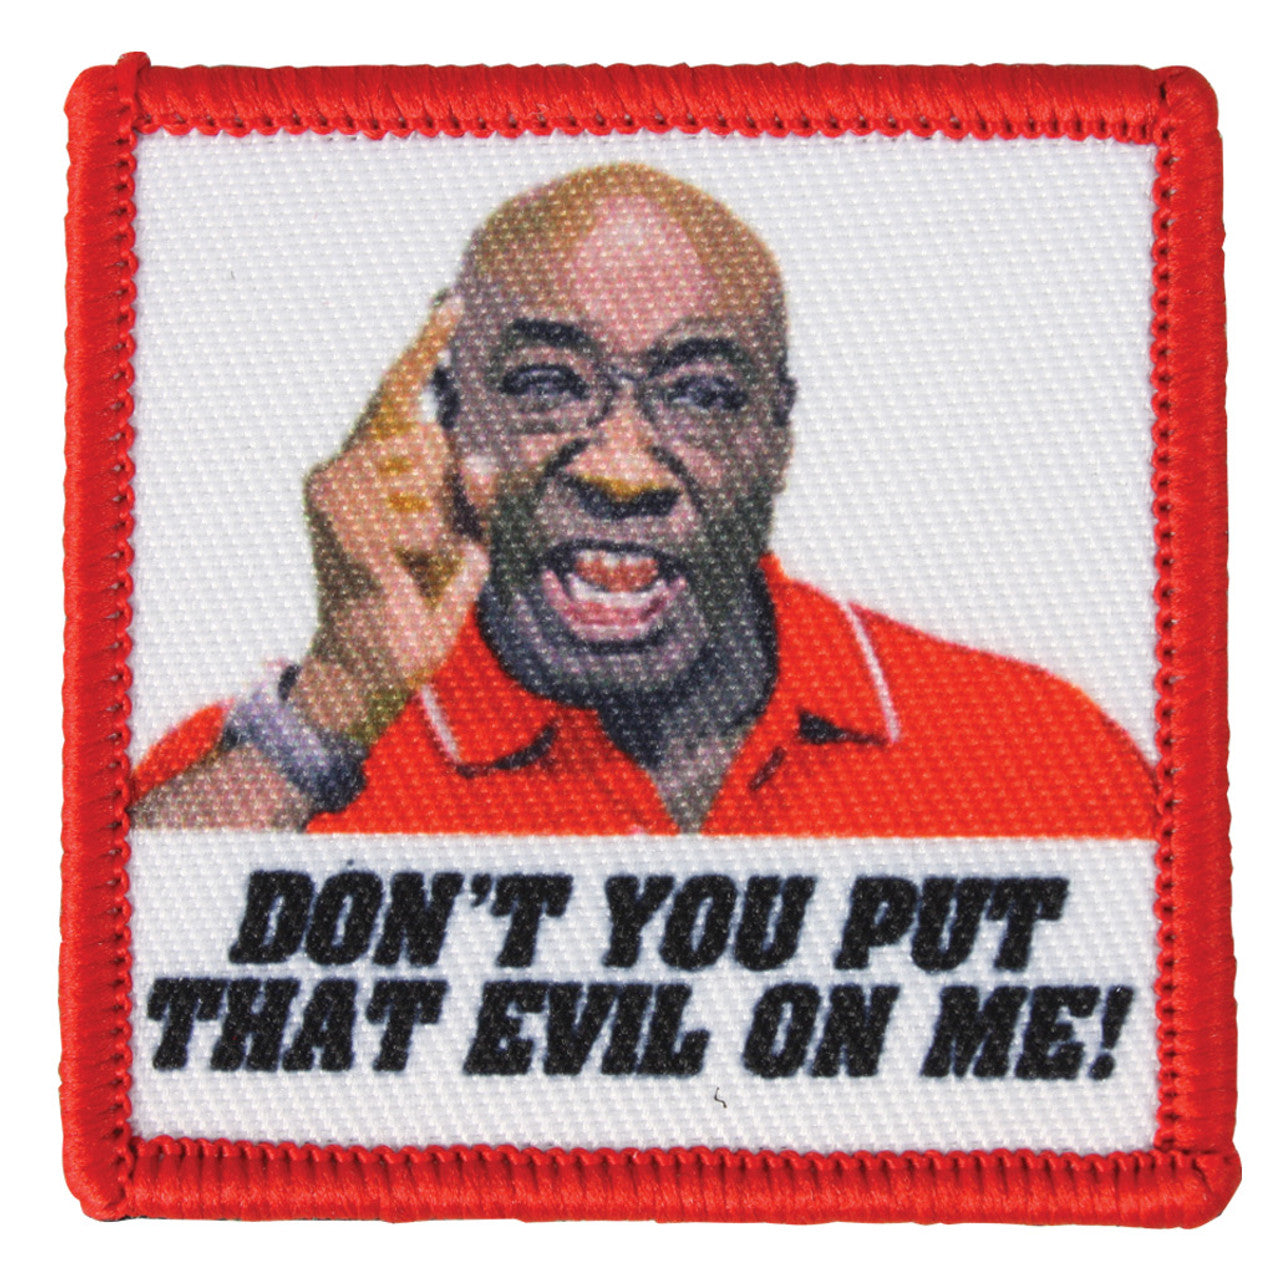 "DONT PUT THAT EVIL ON ME" MORALE PATCH